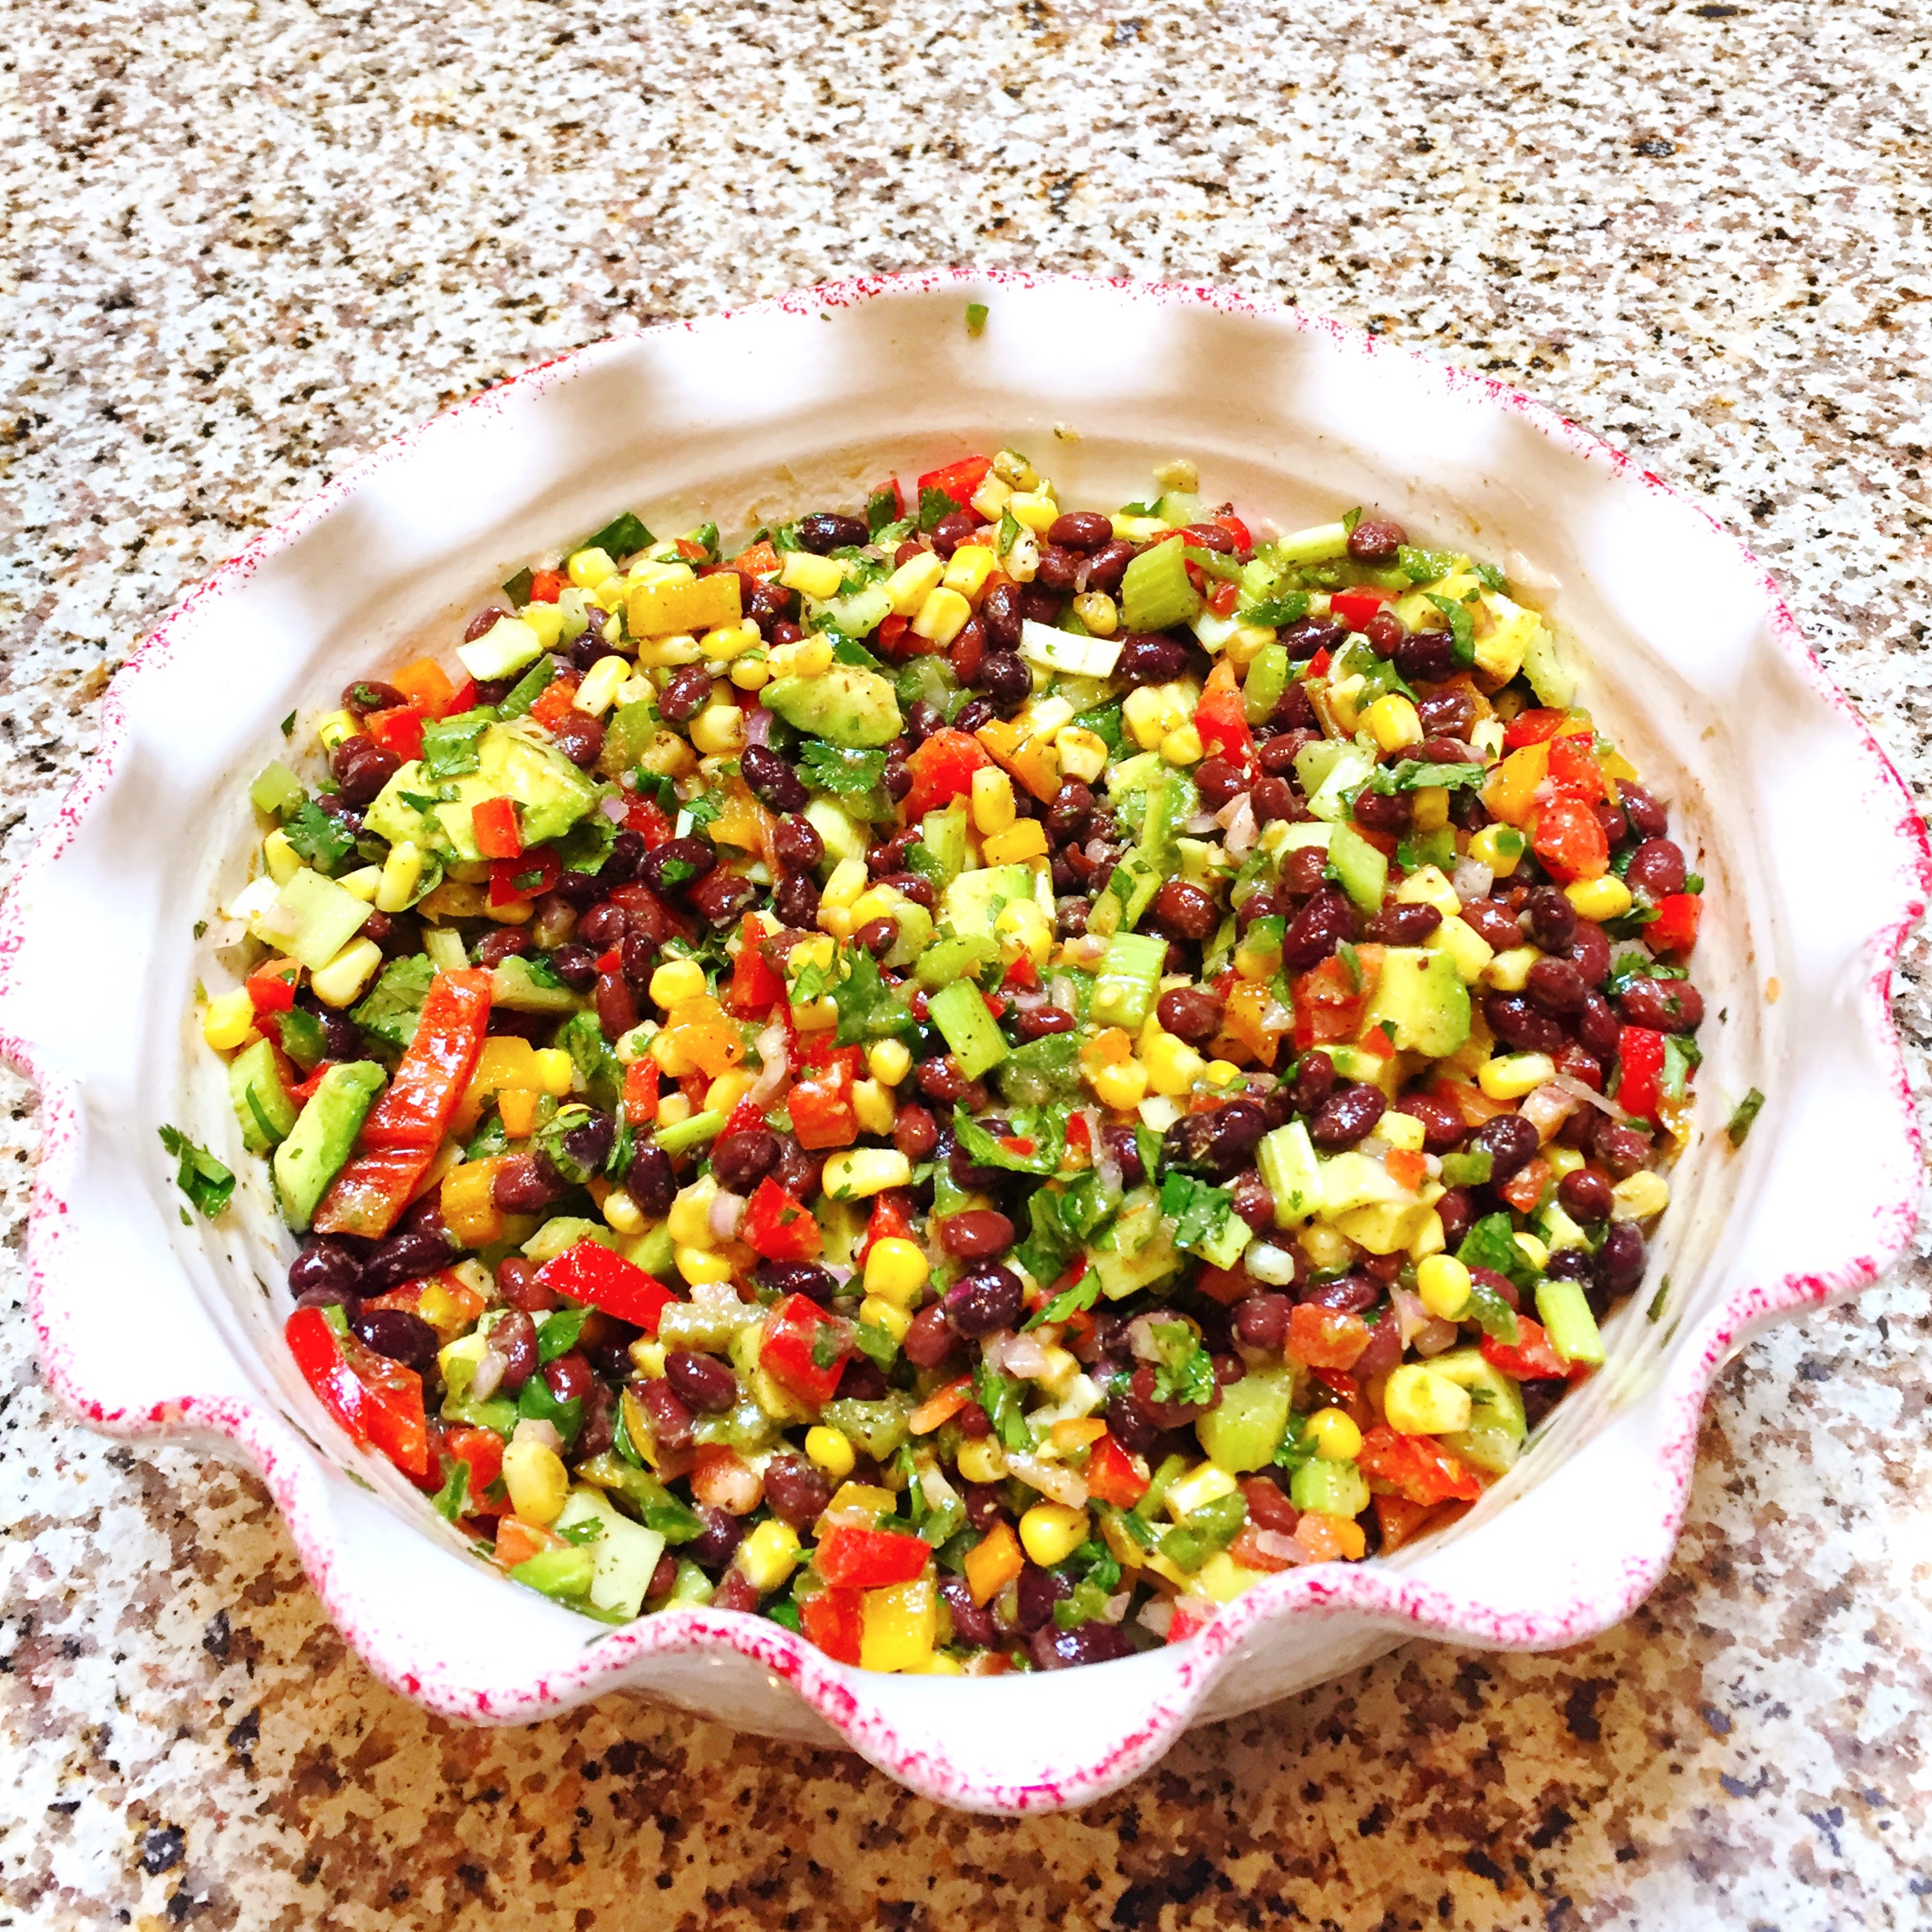 sweet and spicy black bean salad in a bowl on a granite countertop.